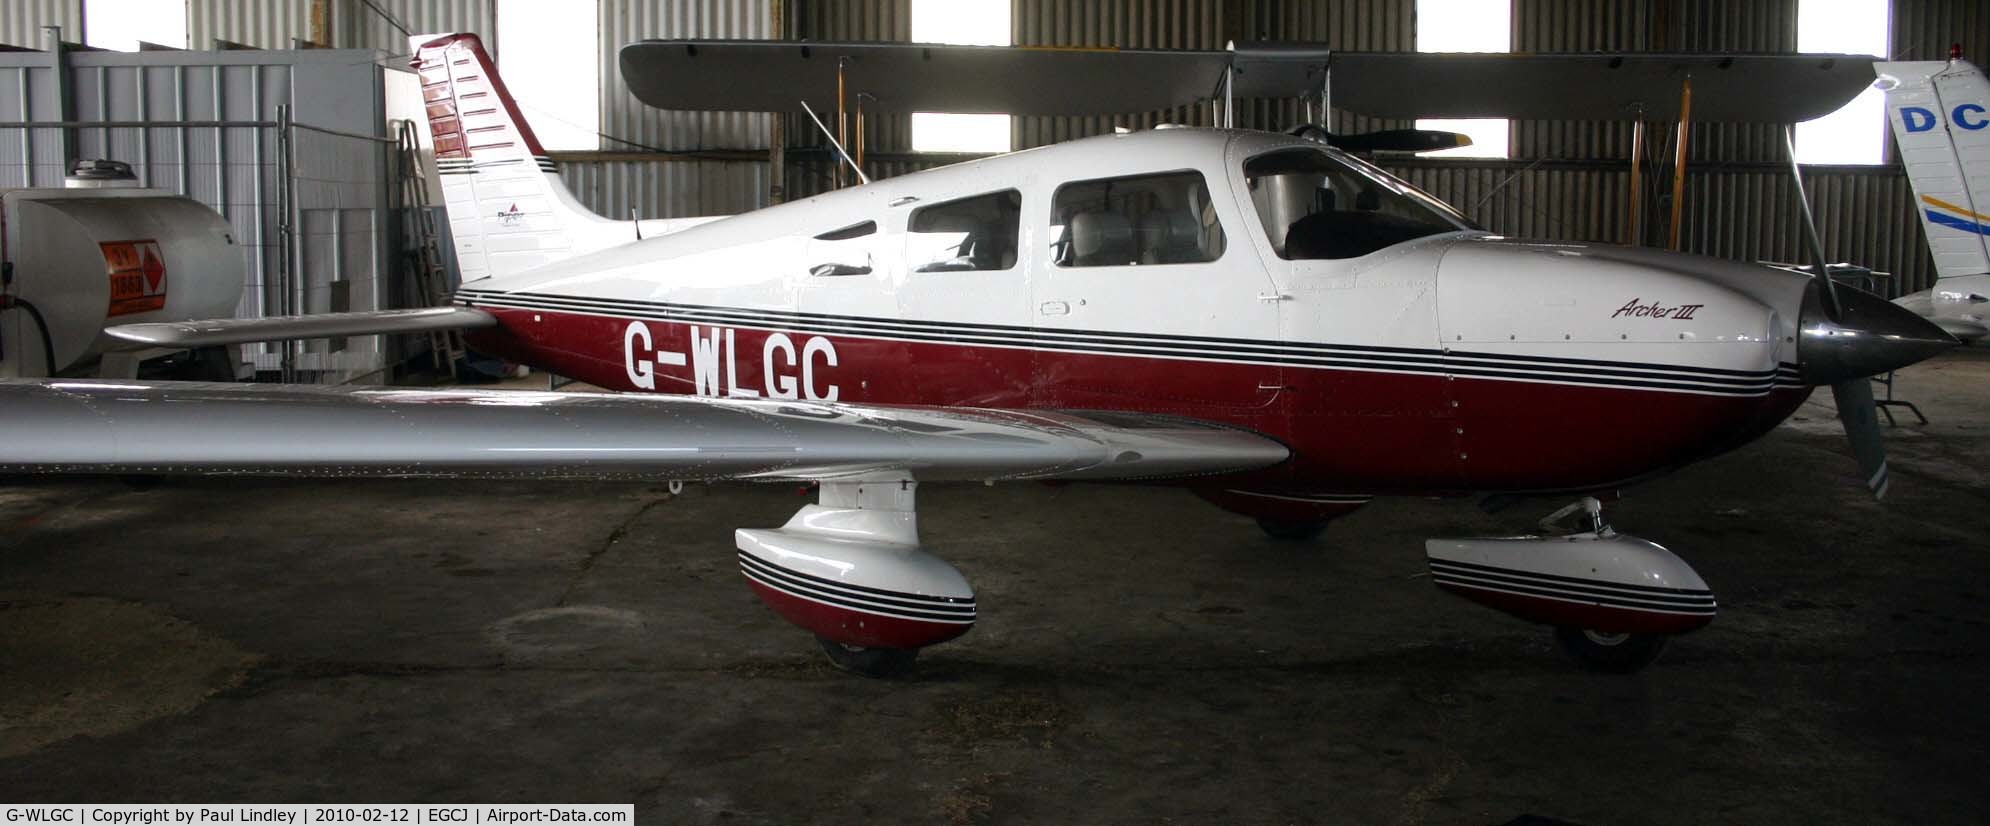 G-WLGC, 2001 Piper PA-28-181 Cherokee Archer III C/N 2843484, shiny in the hanger !